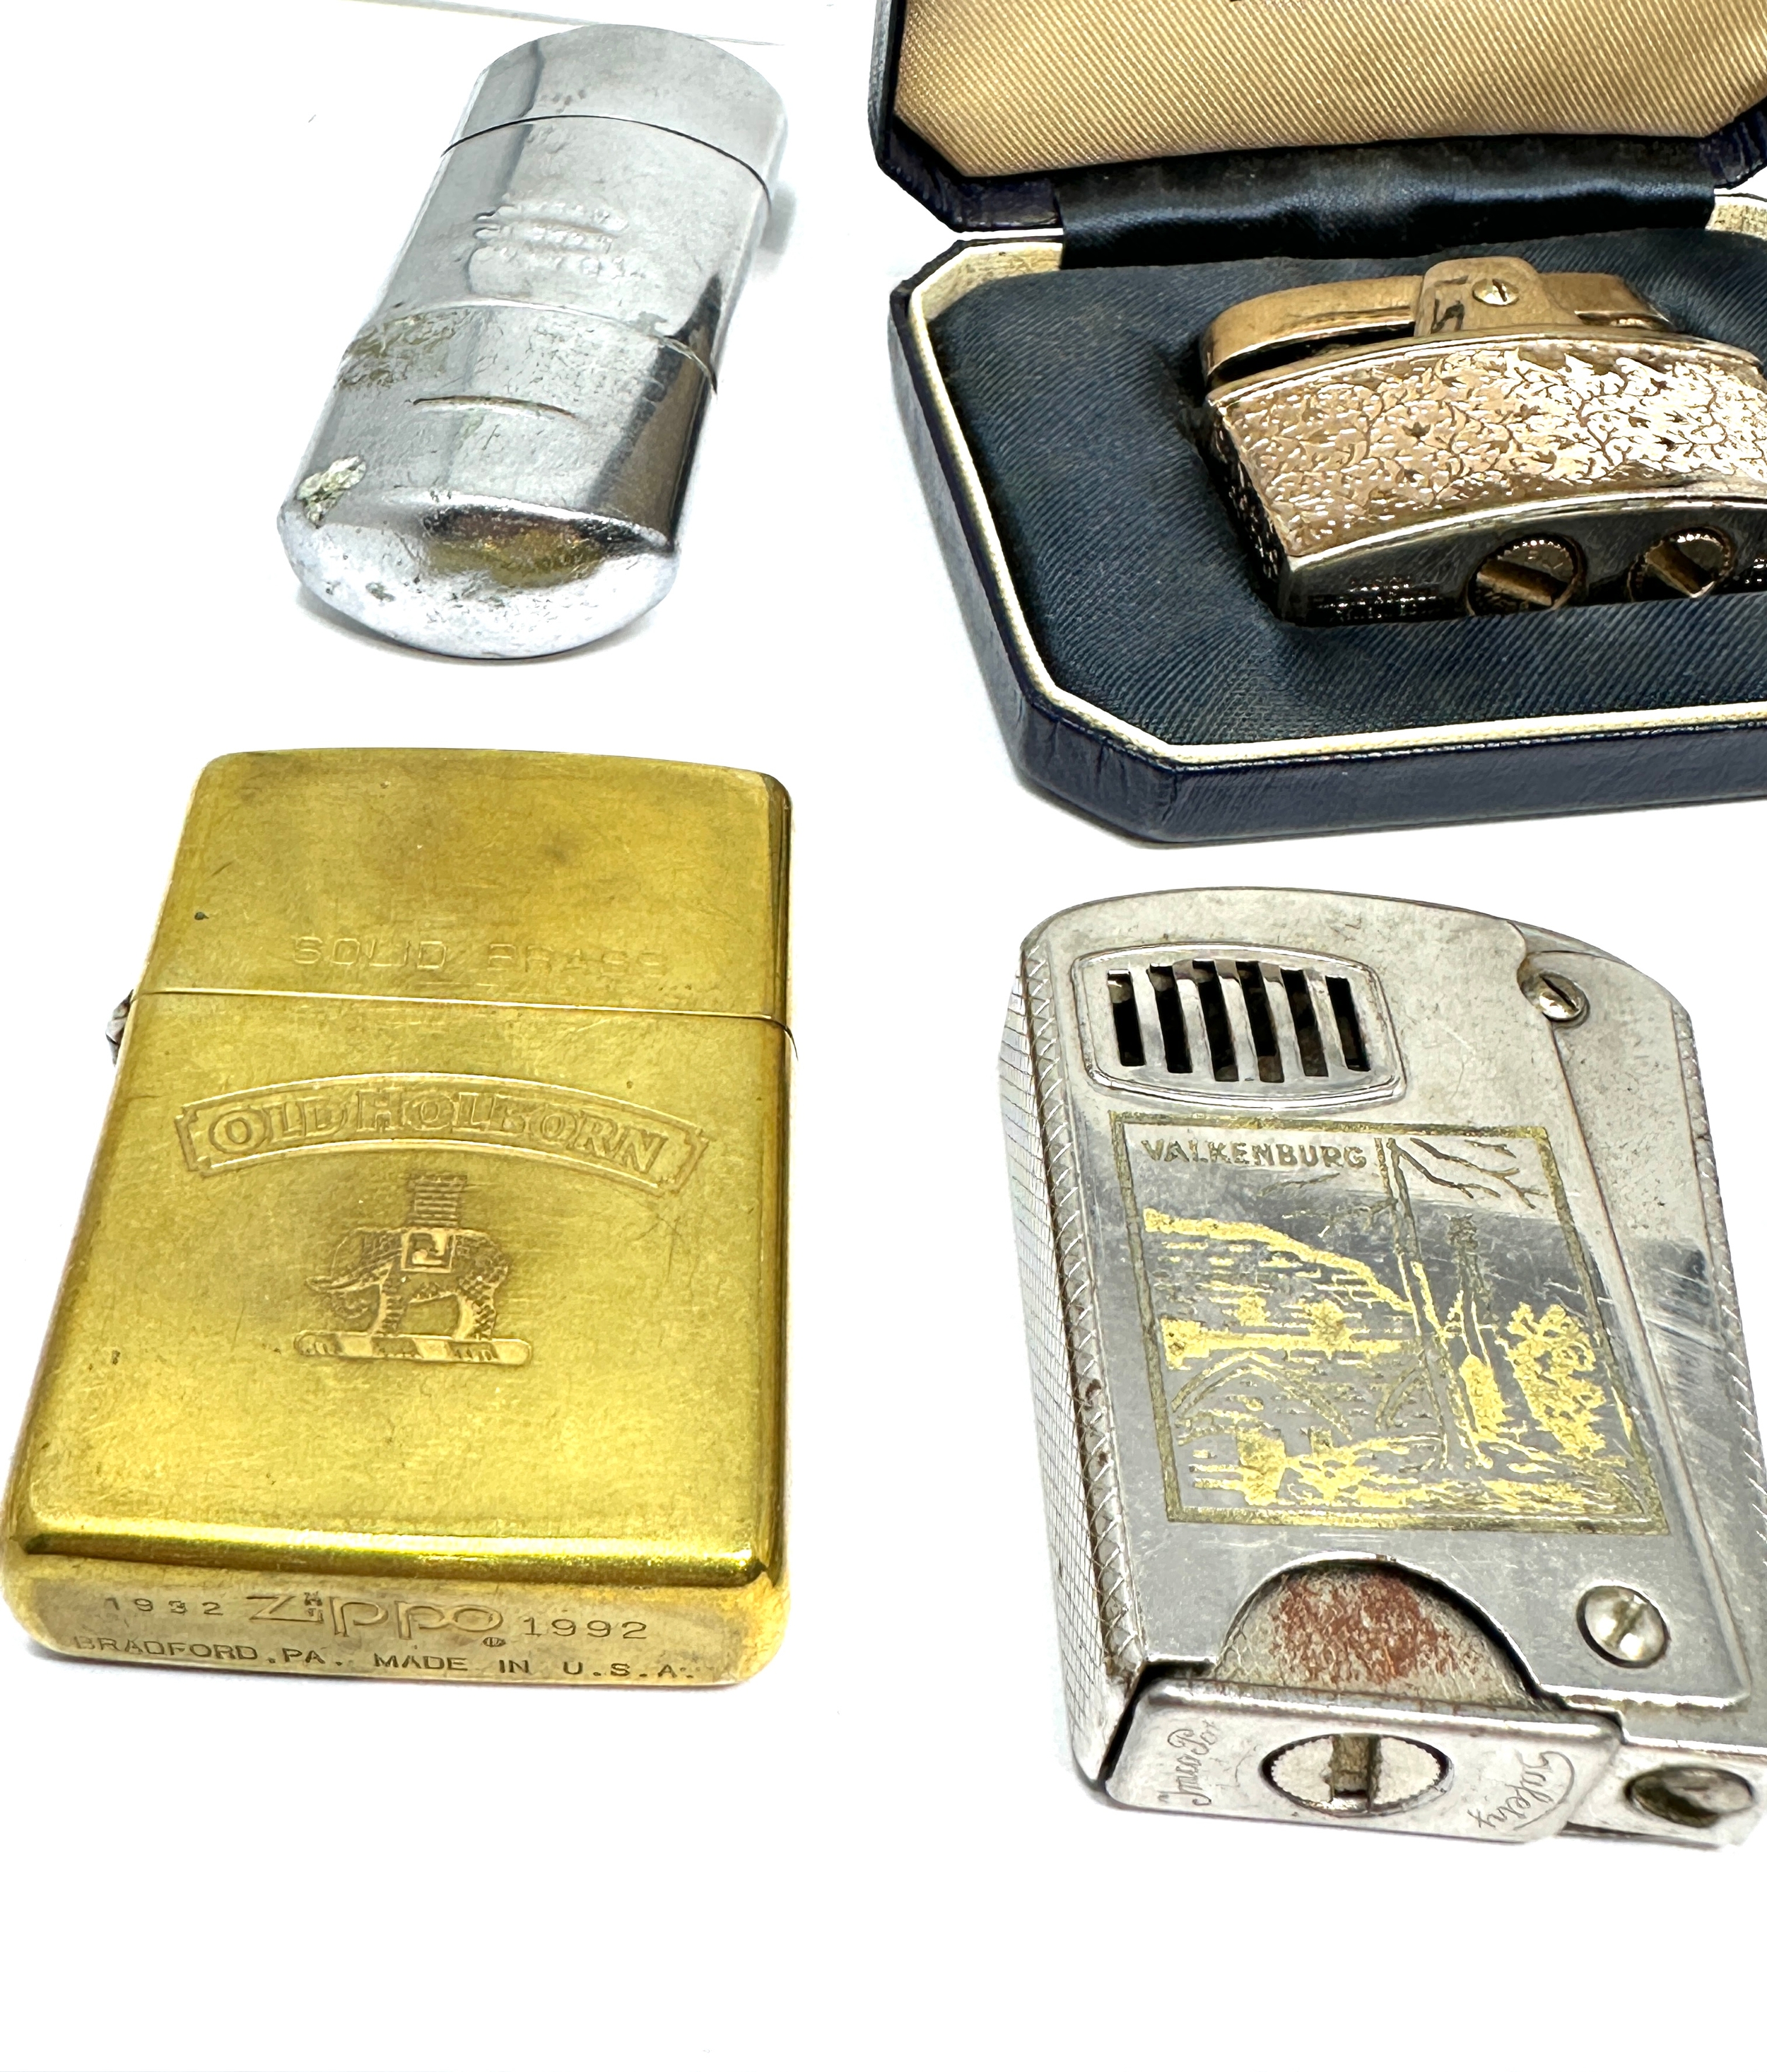 Collection of vintage cigarette lighters includes zippo etc - Image 2 of 4